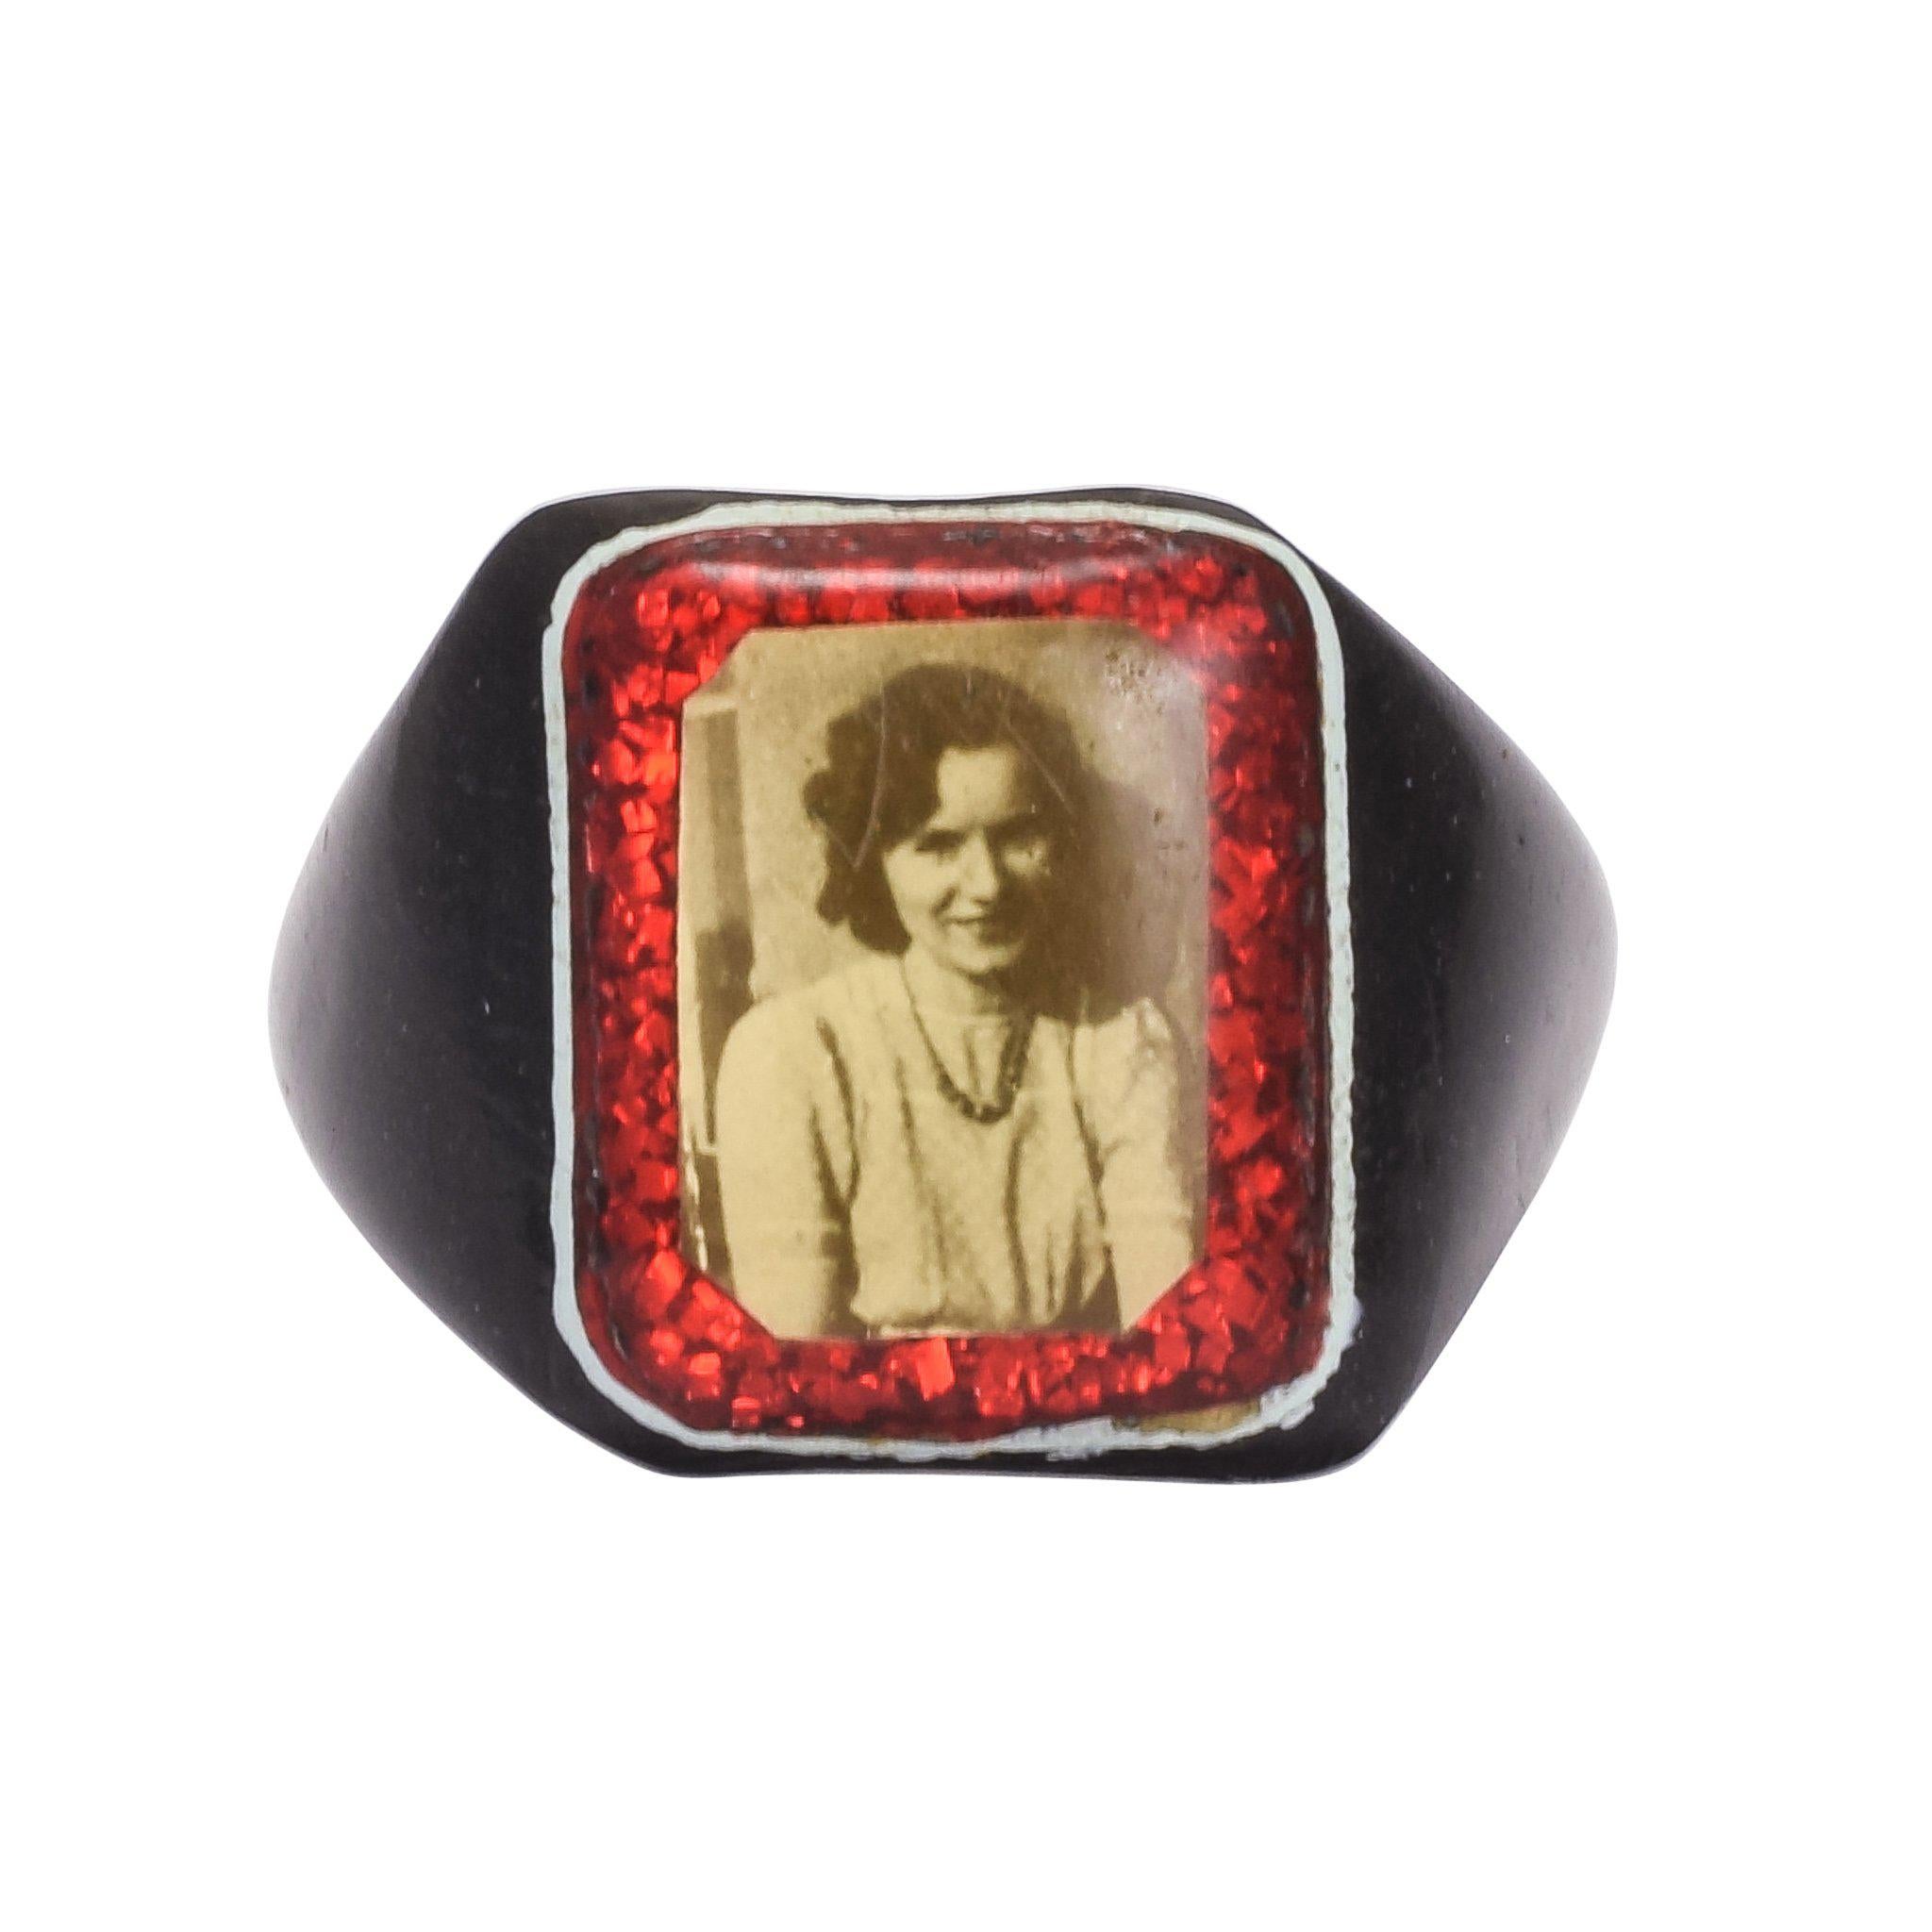 1940s Celluloid Prison Ring